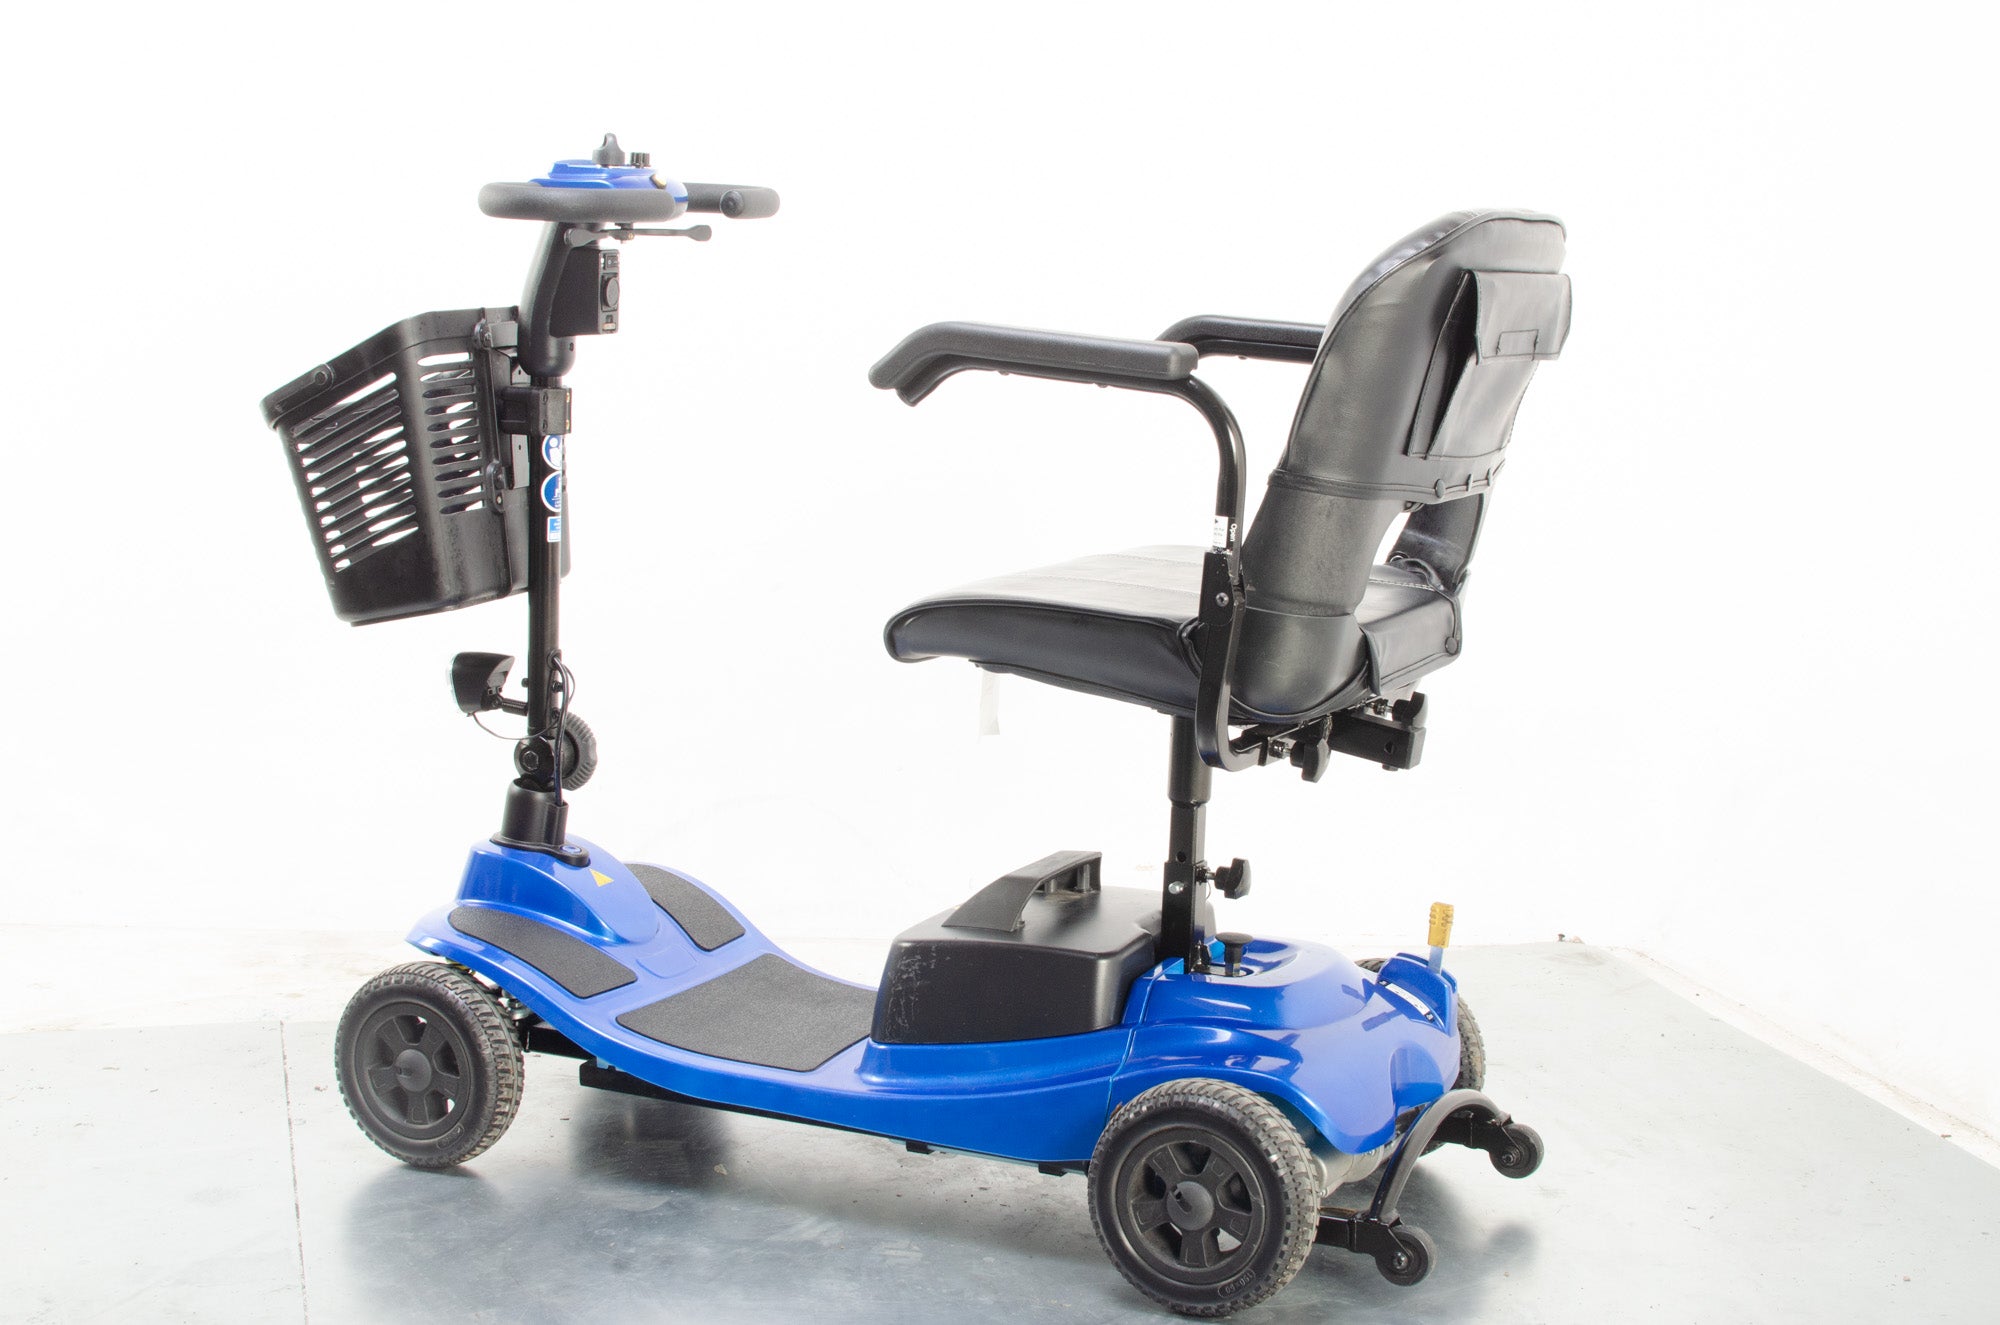 2018 One Rehab Liberty Vogue 4mph Mobility Boot Scooter with Suspension in Blue